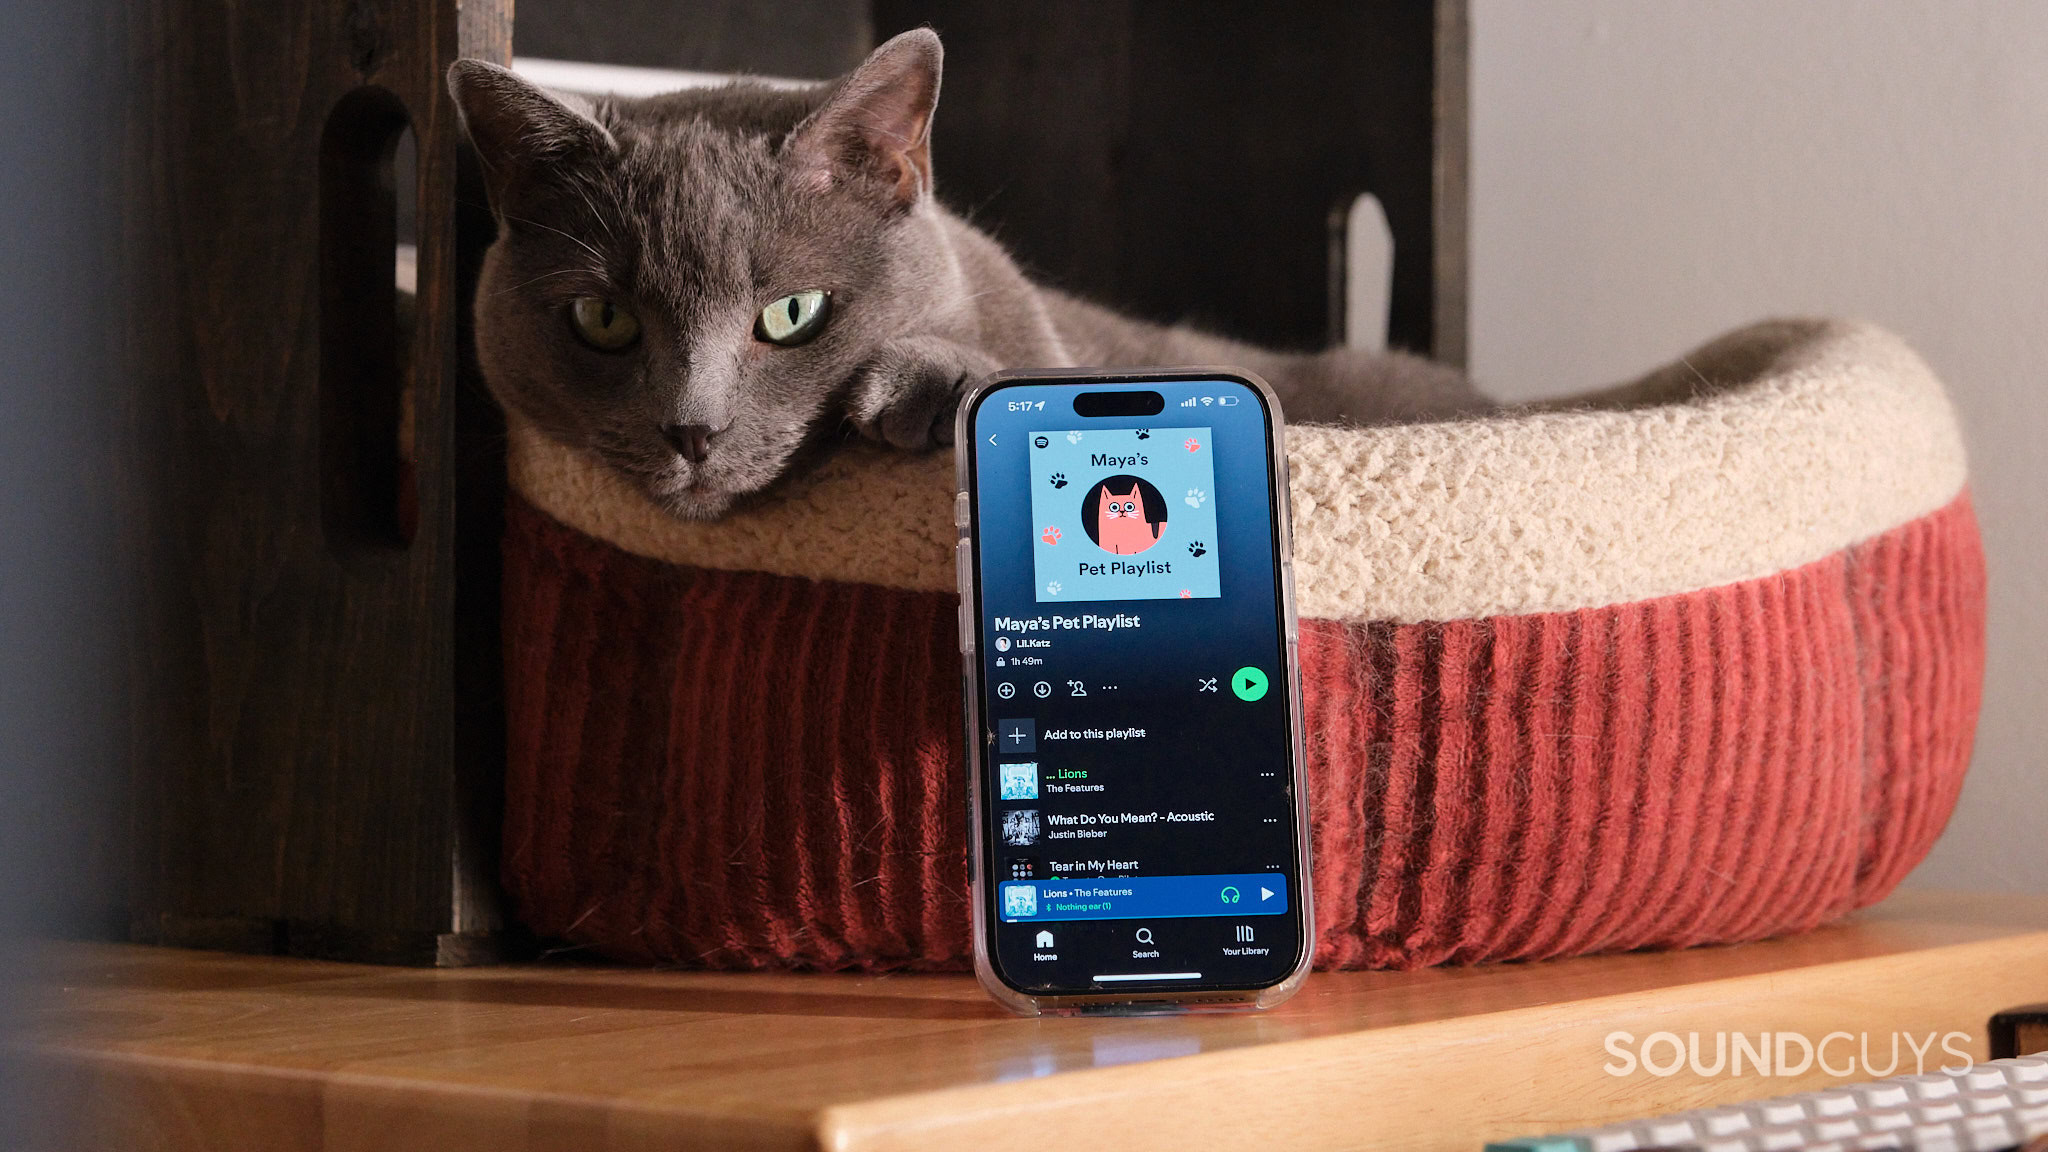 An iPhone displays a Spotify Pet Playlist in front of a gray cat resting in bed.